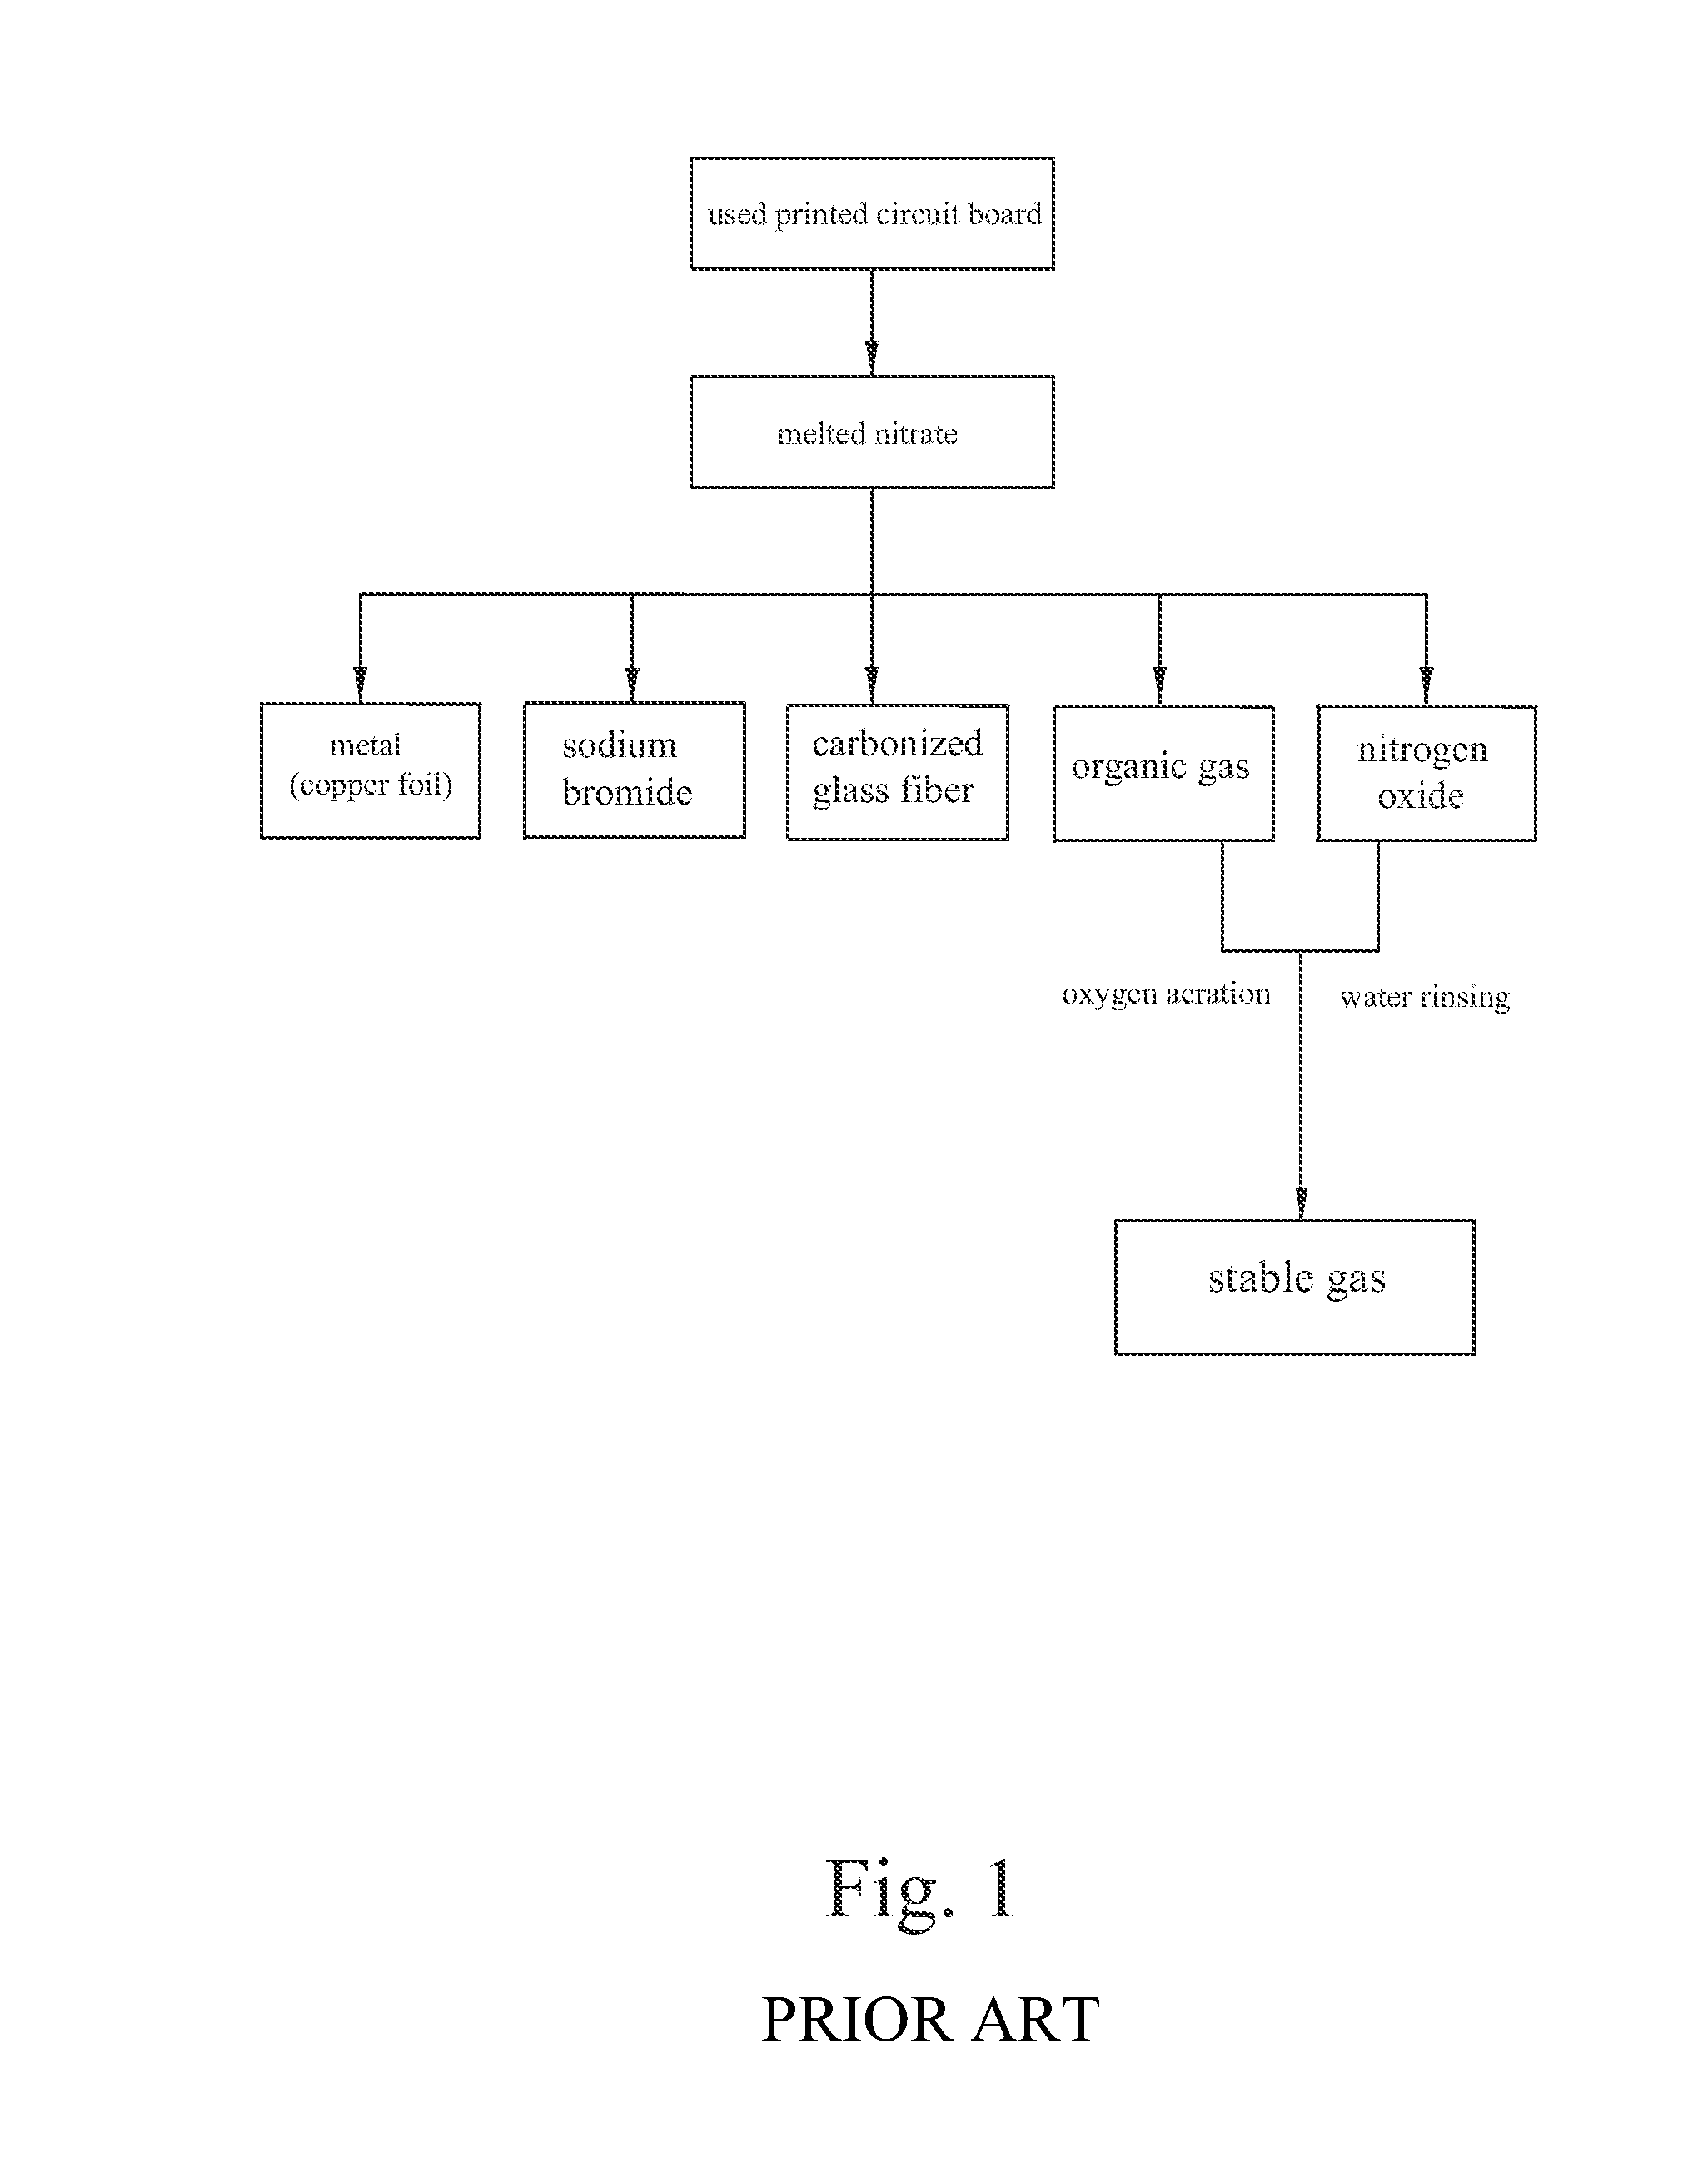 Method and device using pyrolysis for recycling used printed circuit board